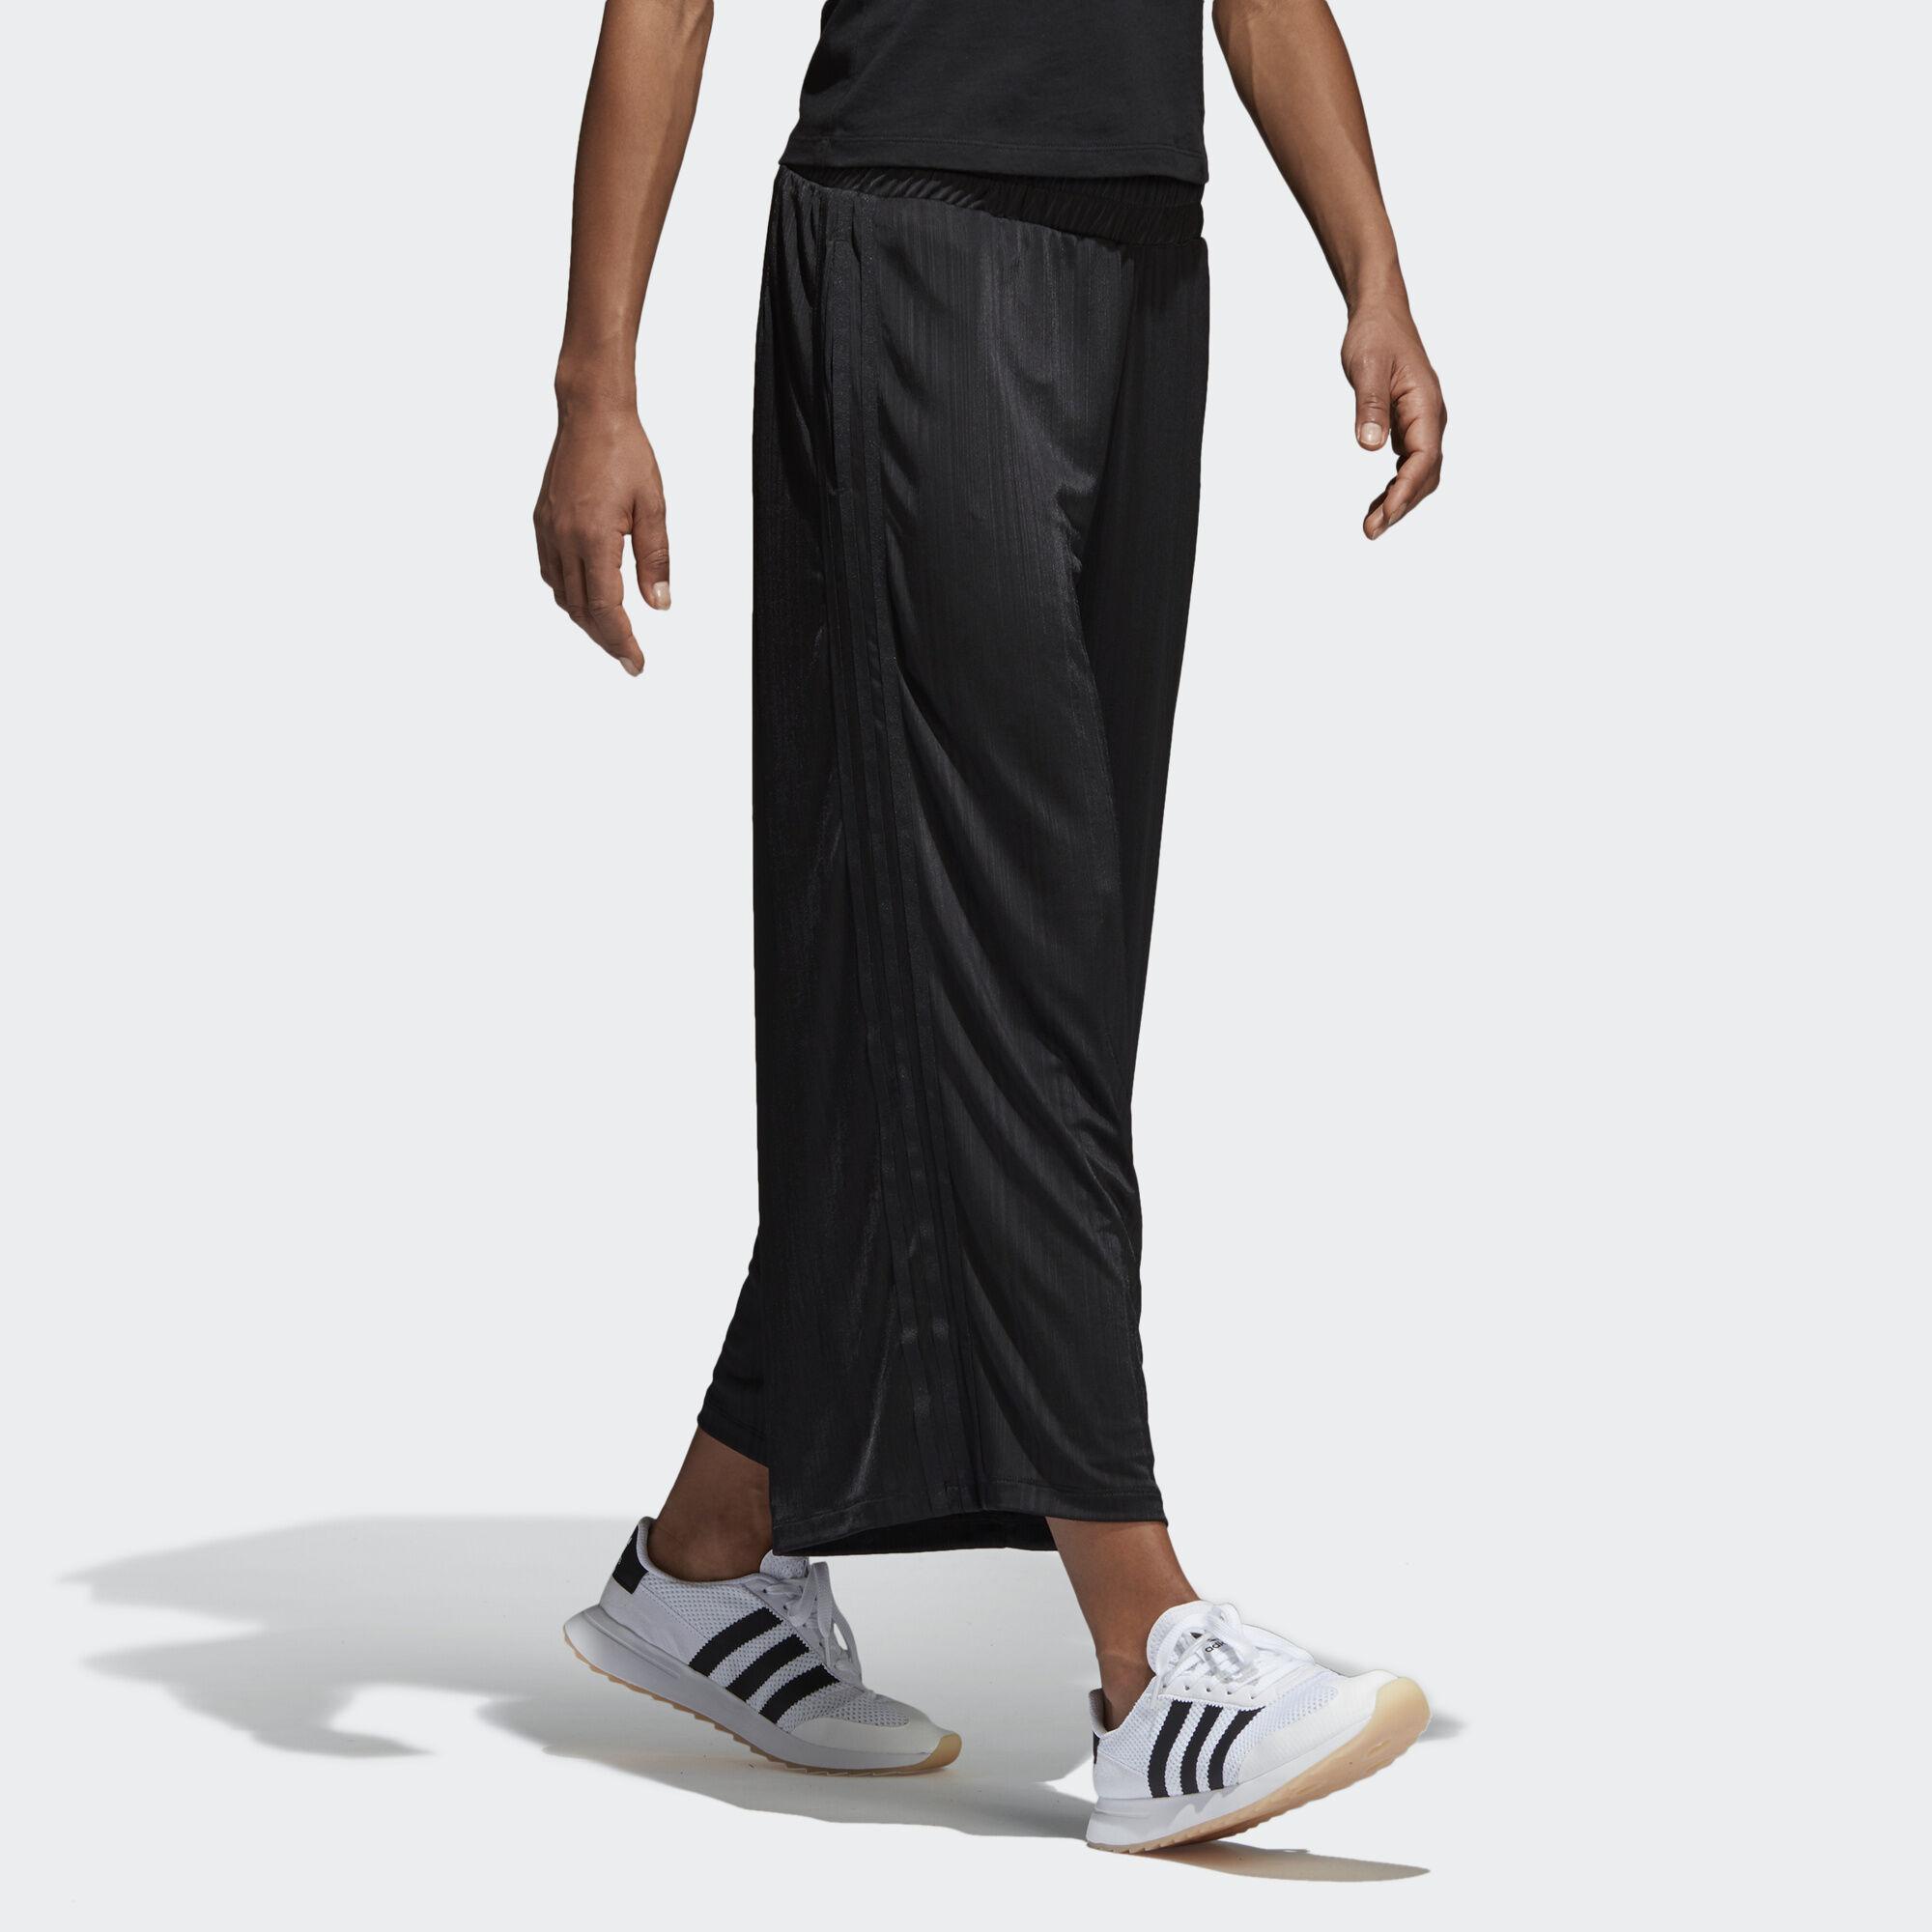 styling complements ribbed pants